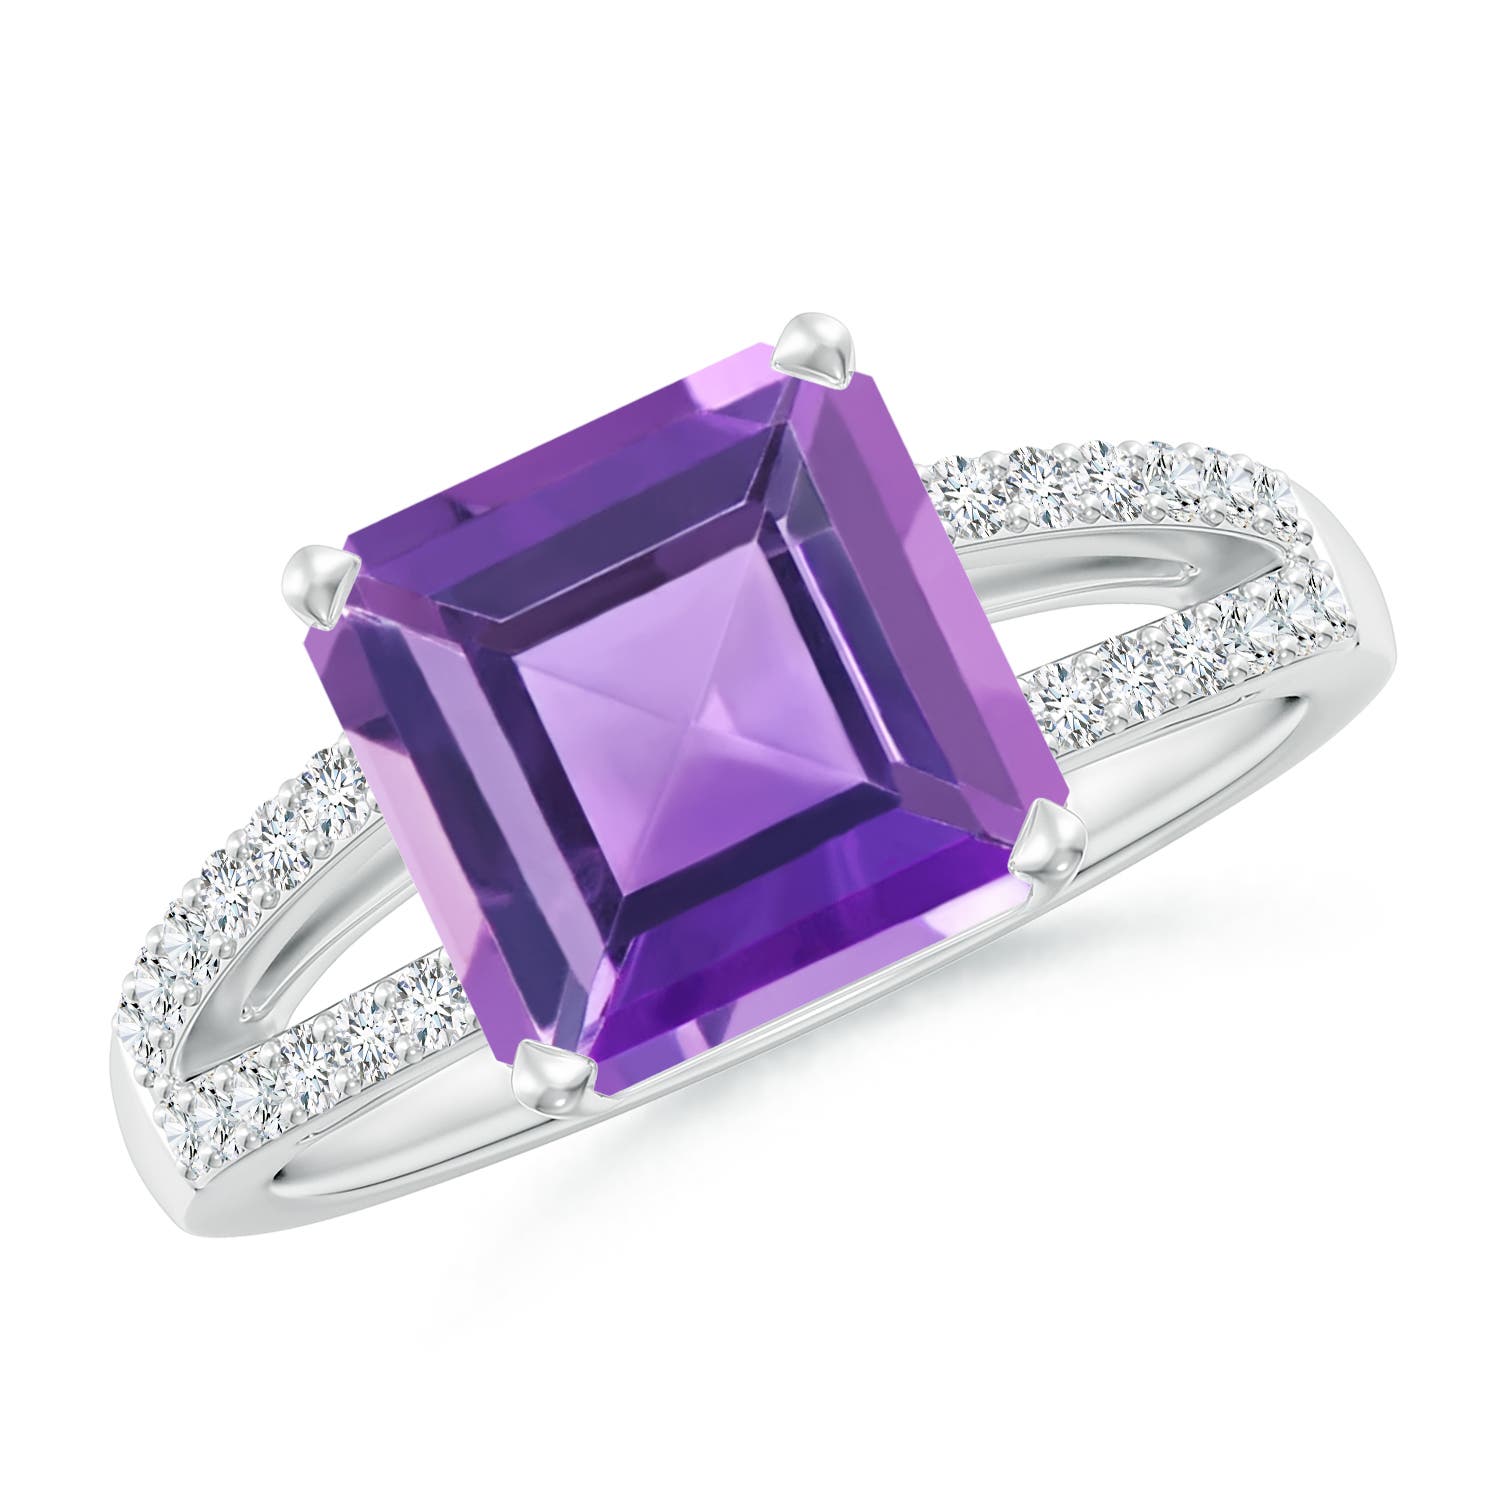 AA - Amethyst / 3.04 CT / 14 KT White Gold